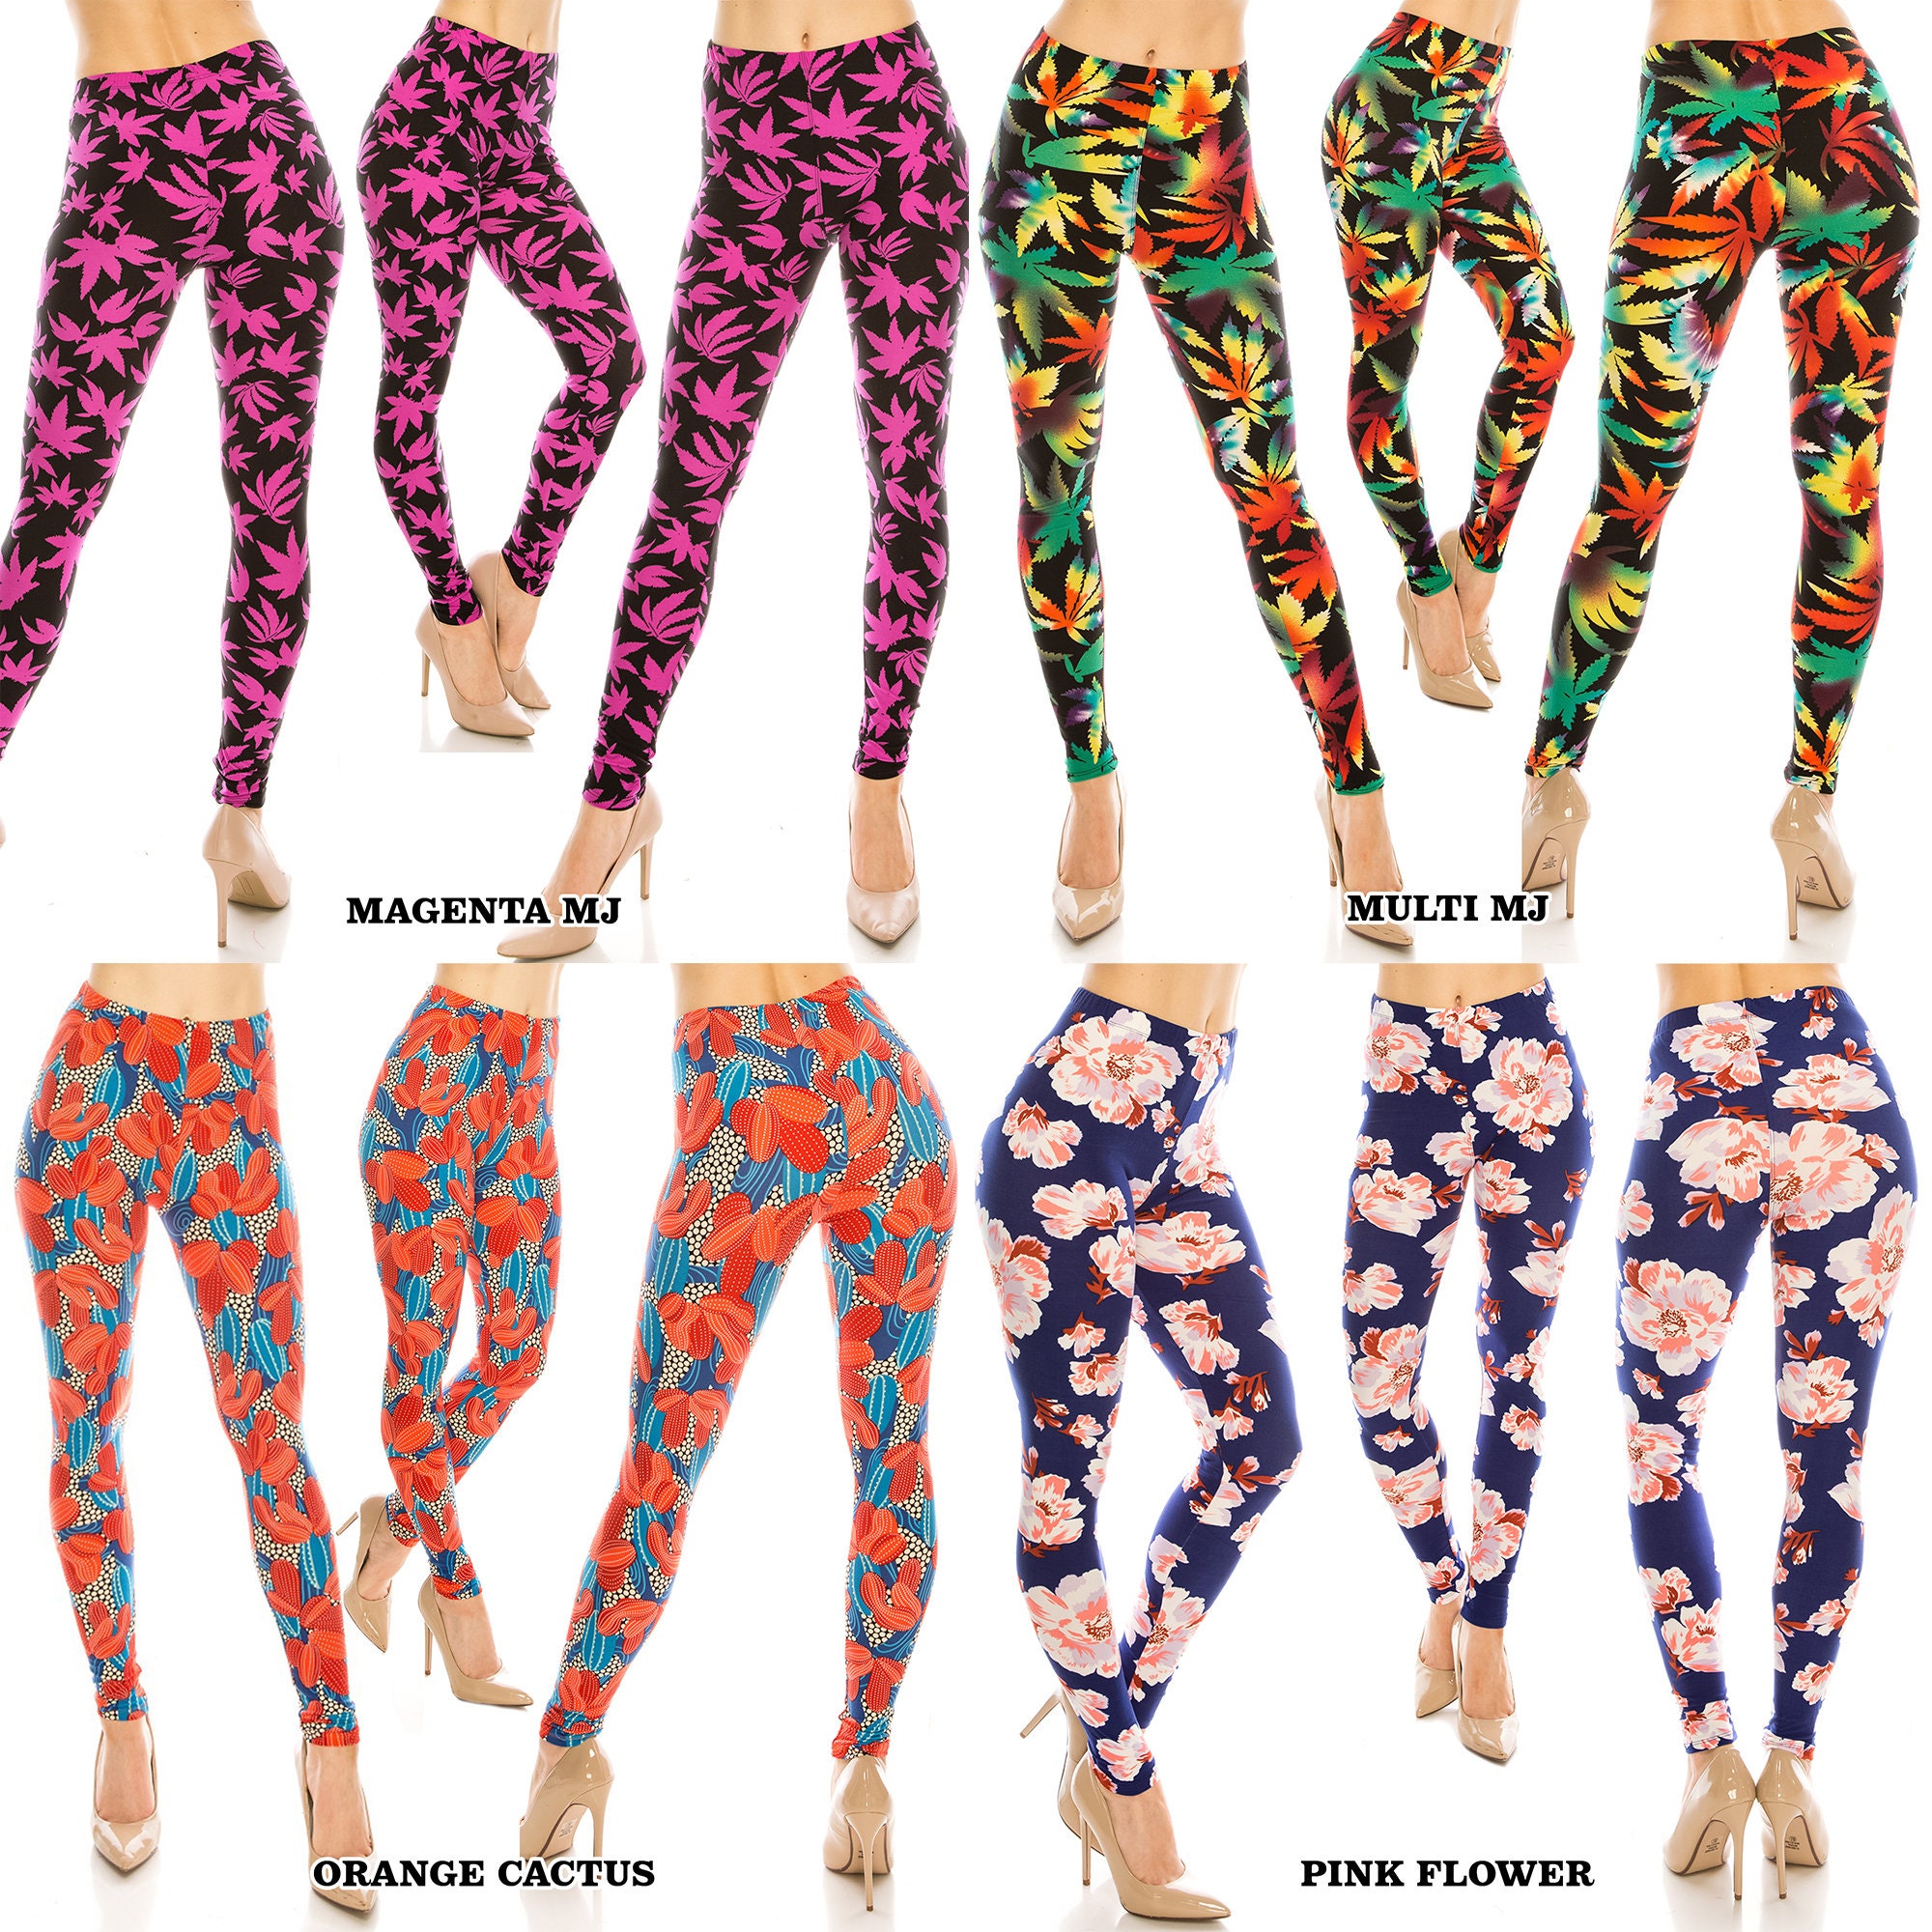 Floral & Plant Patterned Leggings for Women free Shipping 